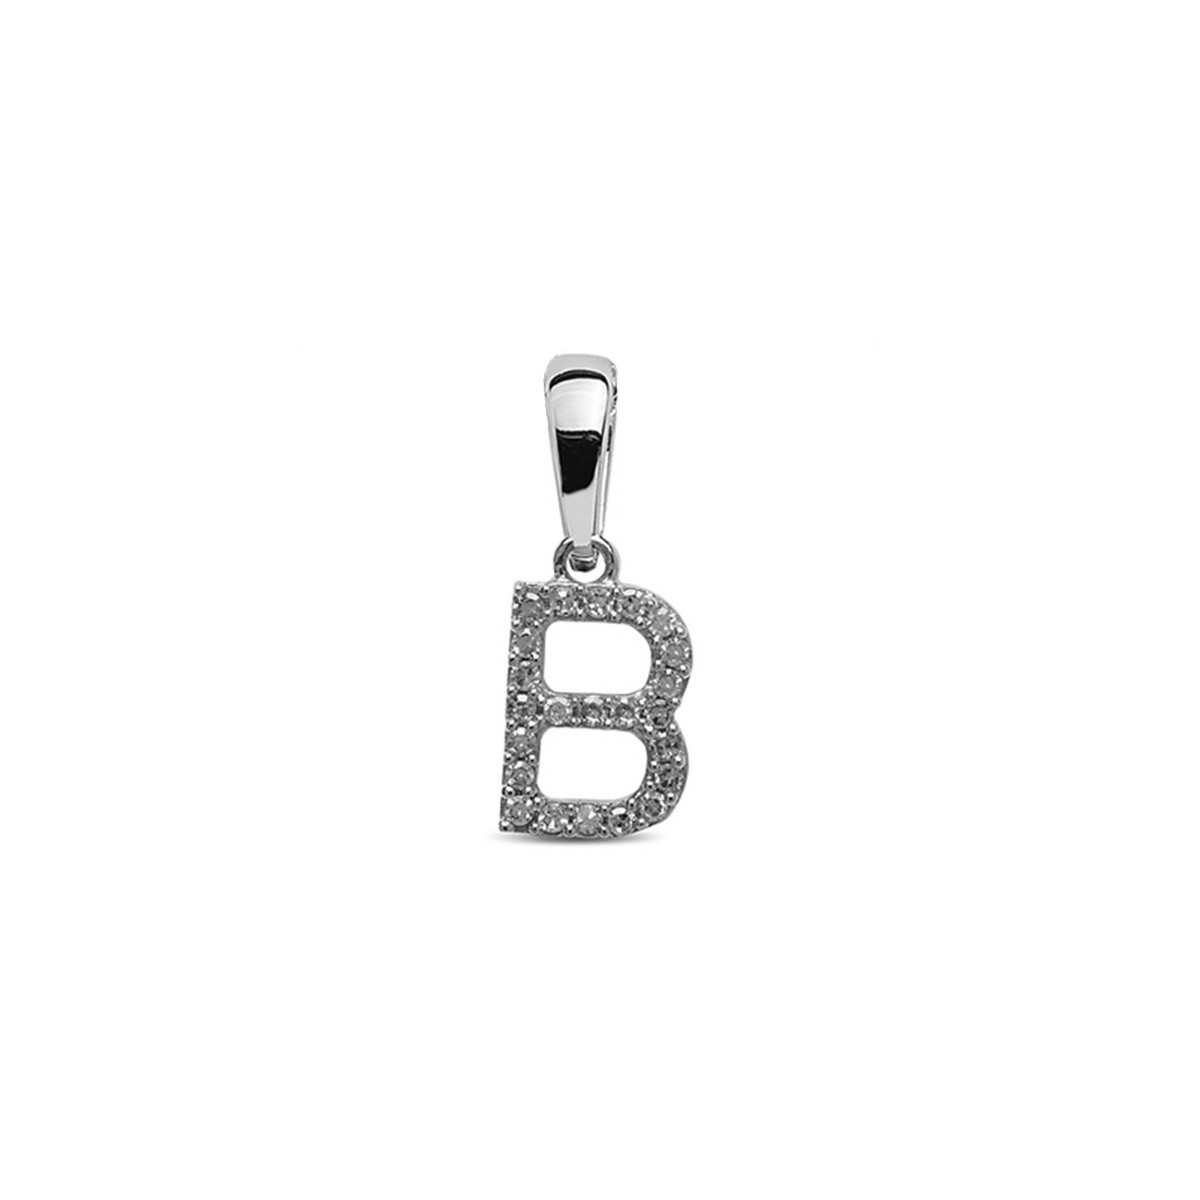 GOLD PENDANT INITIAL B WITH DIAMONDS